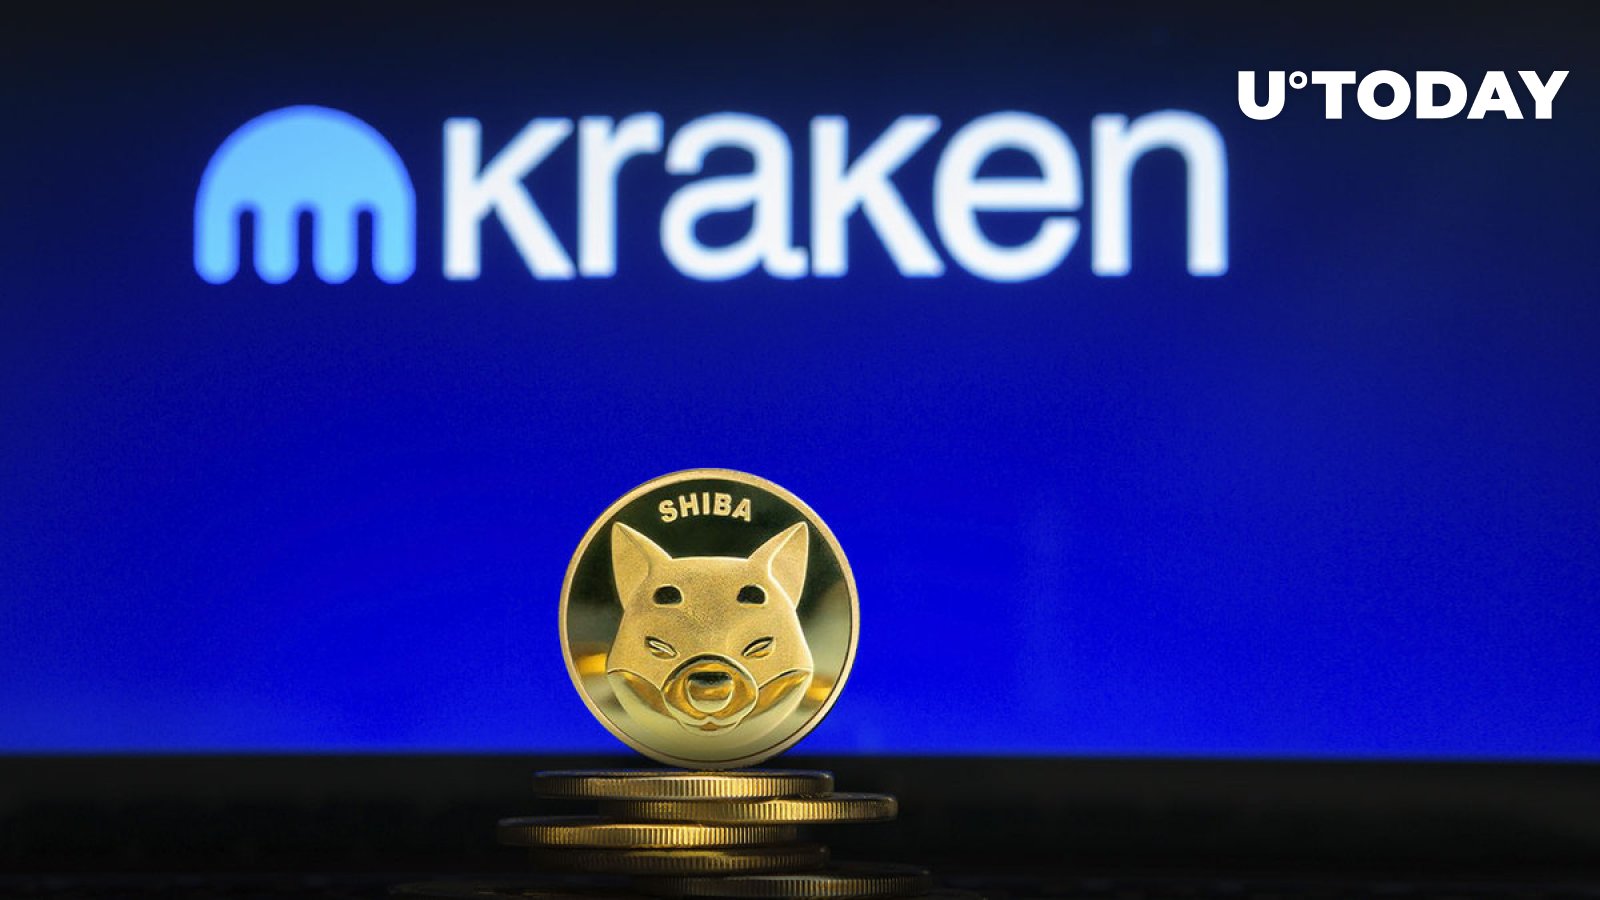 shiba-inu-shib-announcement-made-by-crypto-exchange-kraken-details